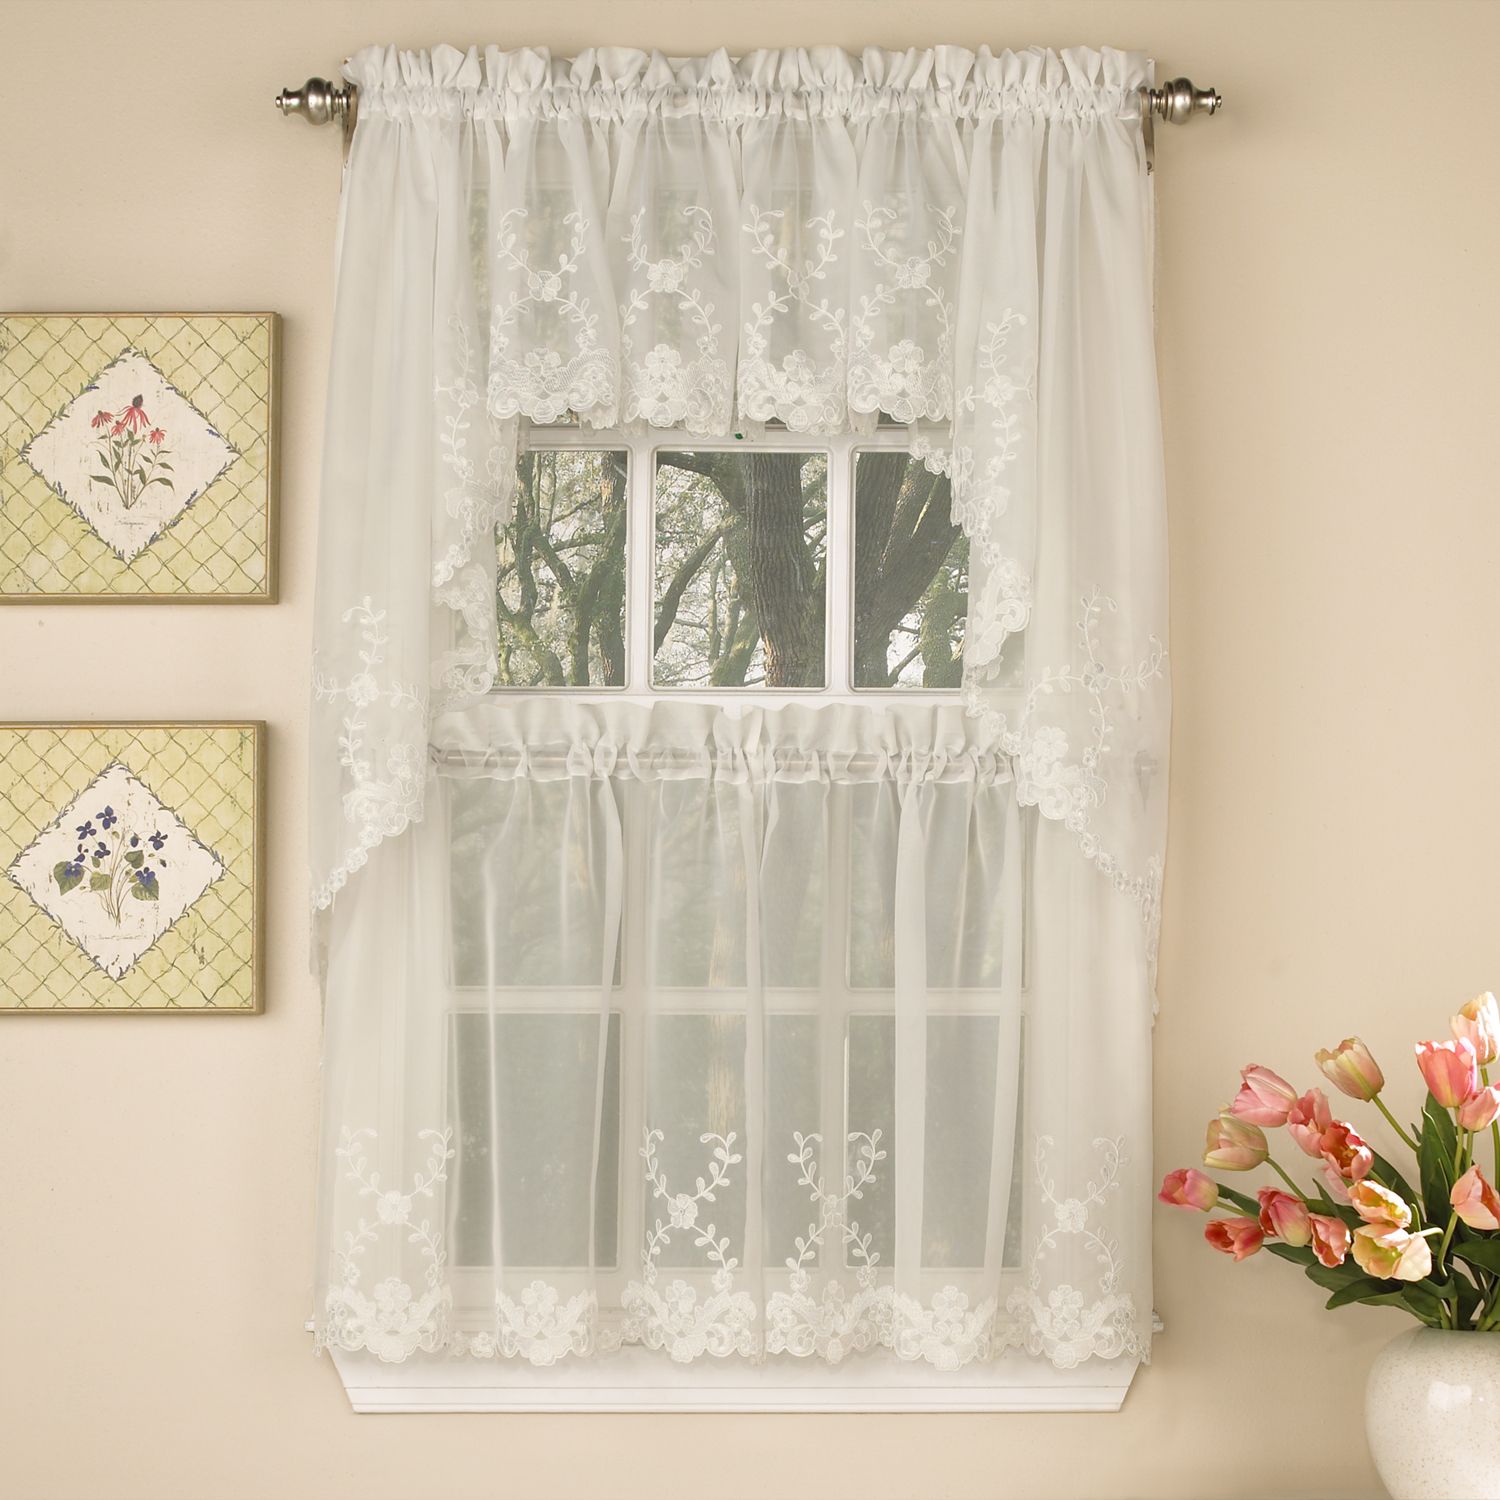 Details About Laurel Leaf Sheer Voile Embroidered Ivory Kitchen Curtains  Tier, Valance Or Swag Throughout Floral Embroidered Sheer Kitchen Curtain Tiers, Swags And Valances (View 3 of 20)